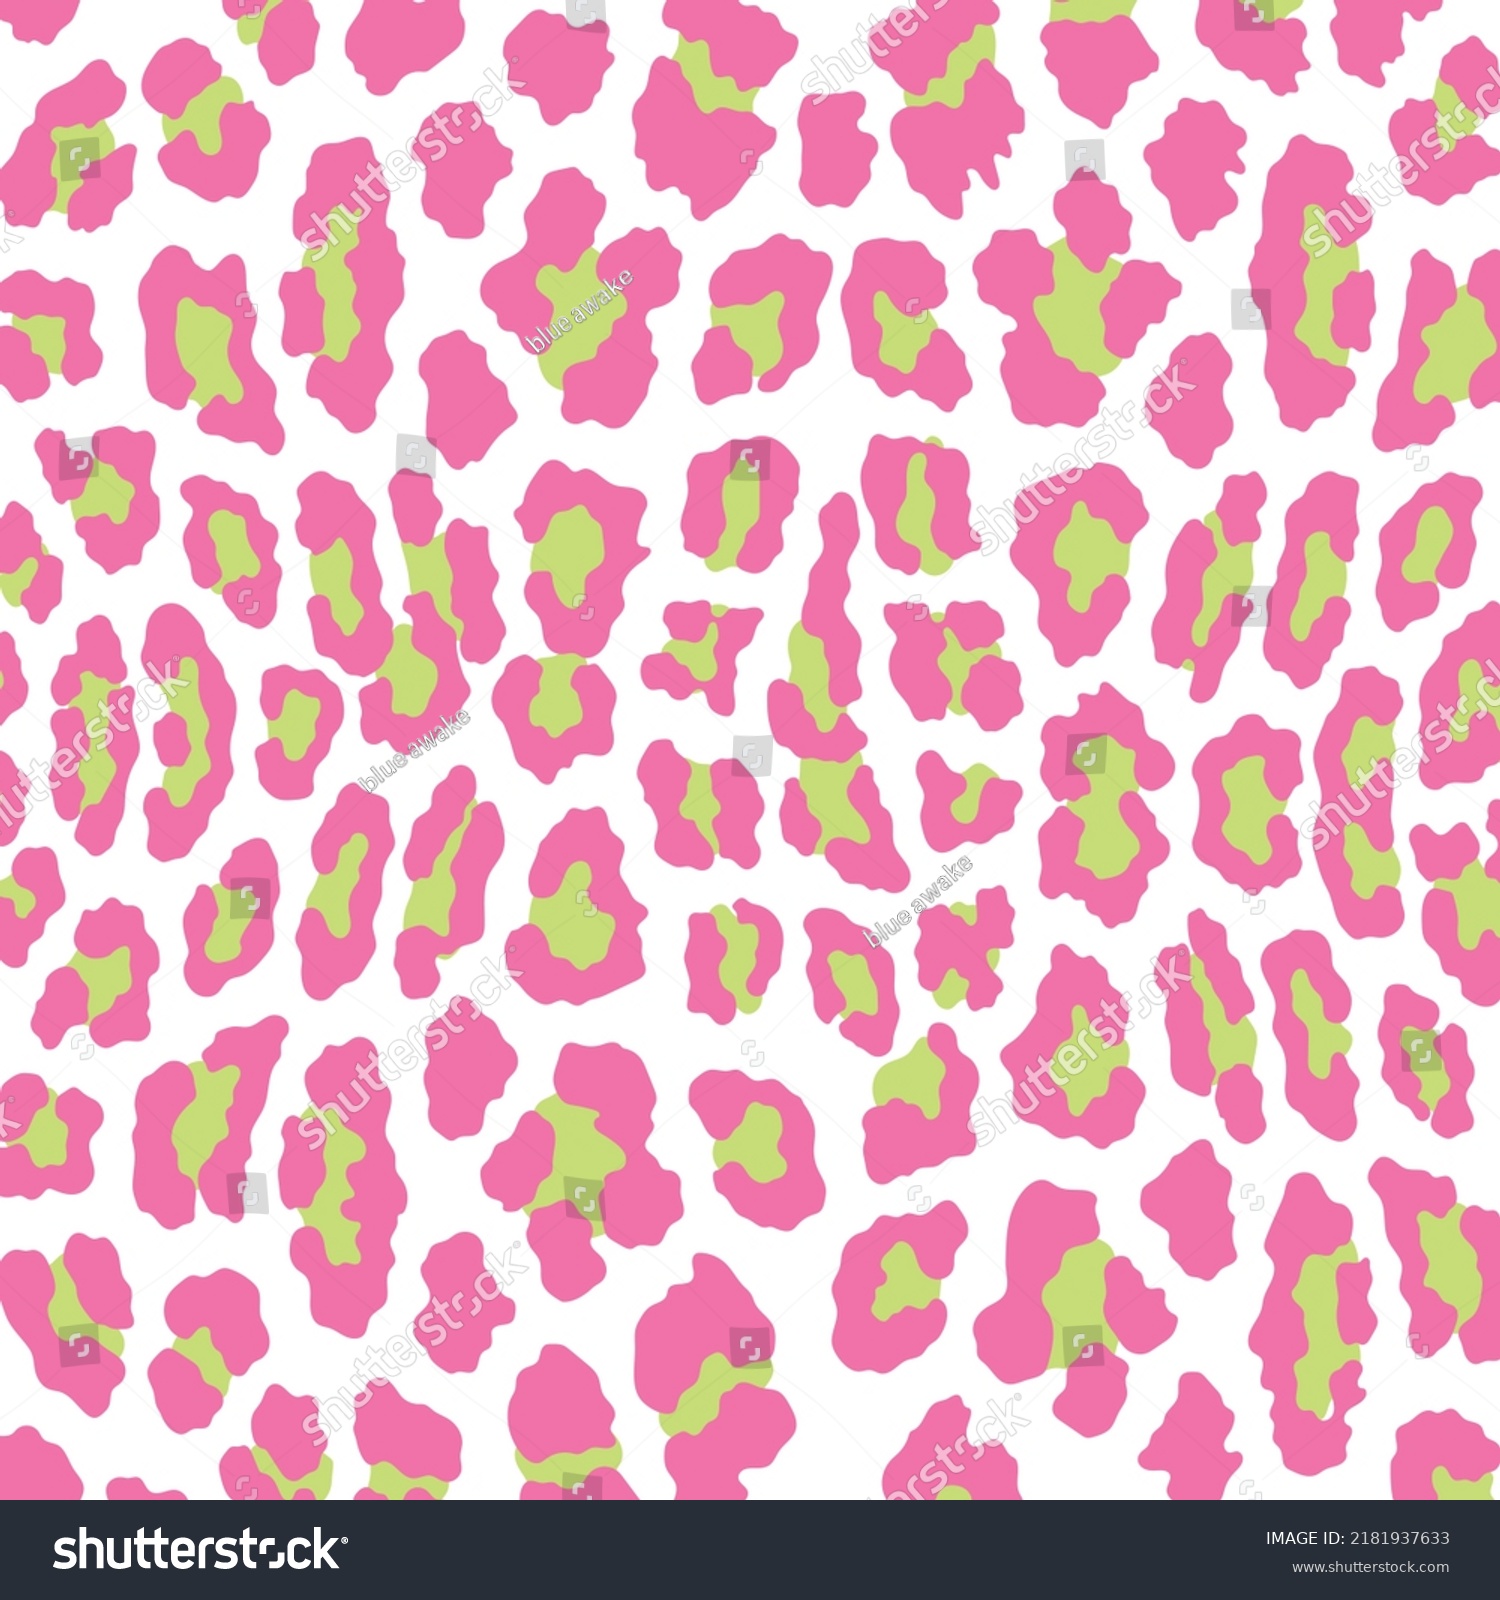 11,032 Pink Panther Pattern Images, Stock Photos & Vectors | Shutterstock